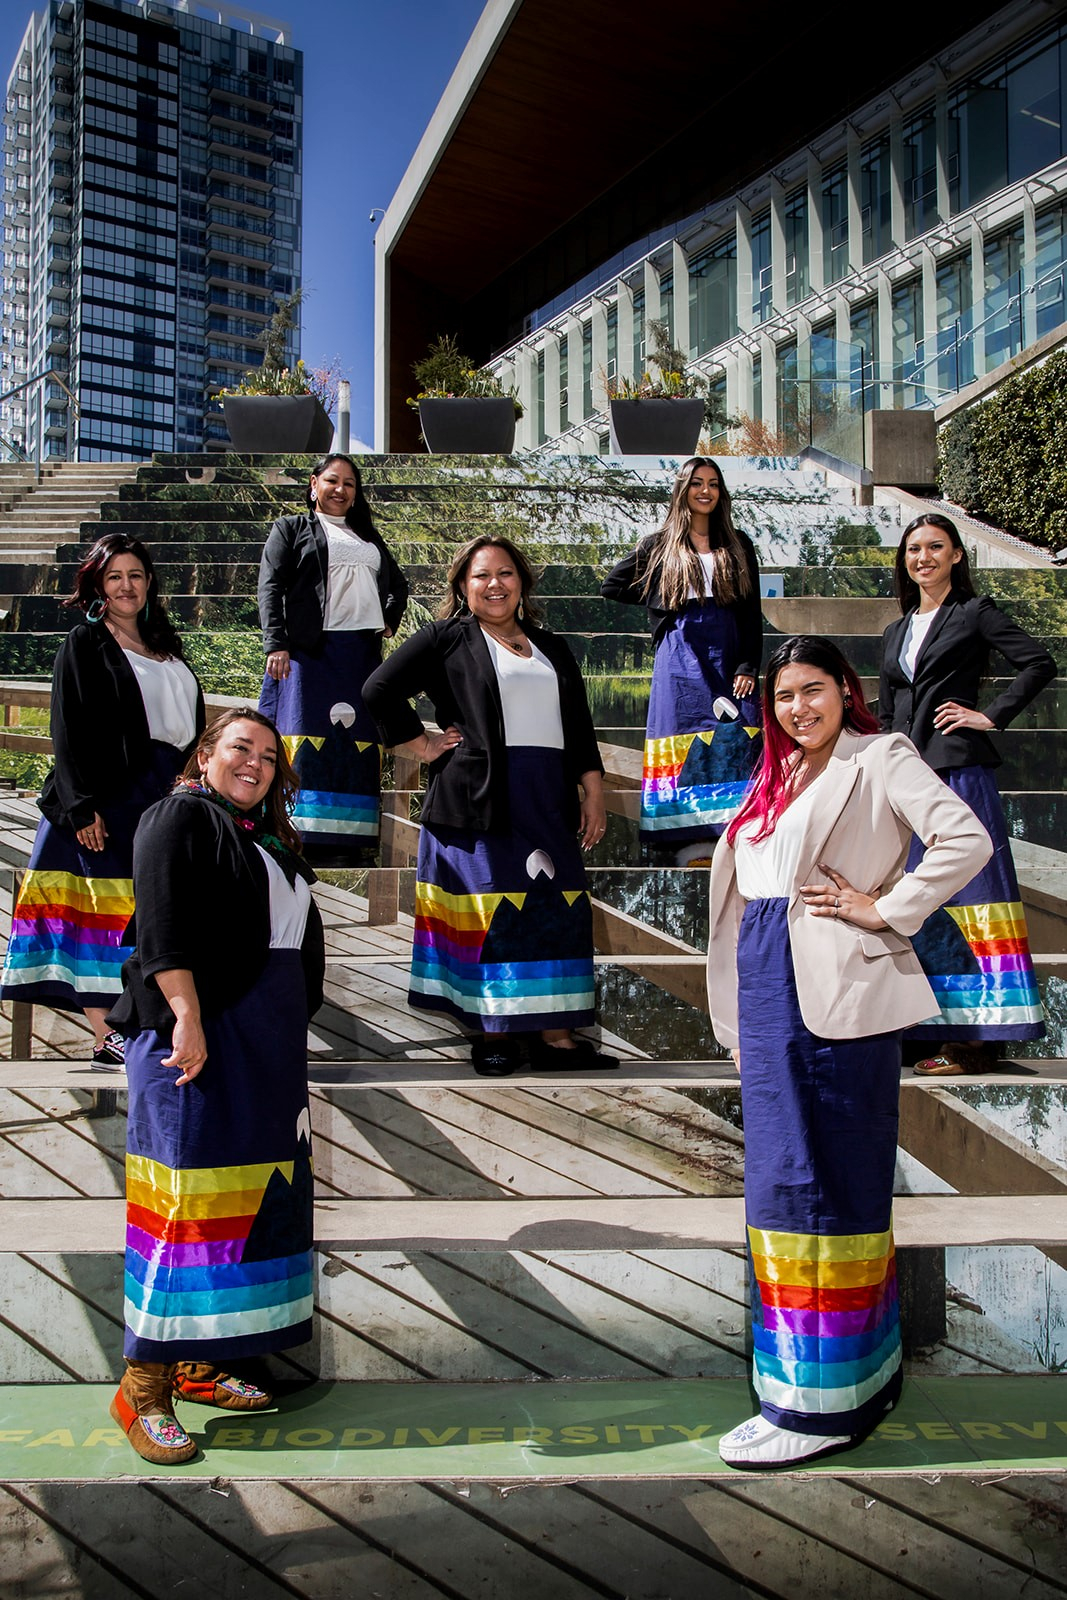 Several Indigenous women smiling and wearing ribbon skirts stand spaced apart on steps.